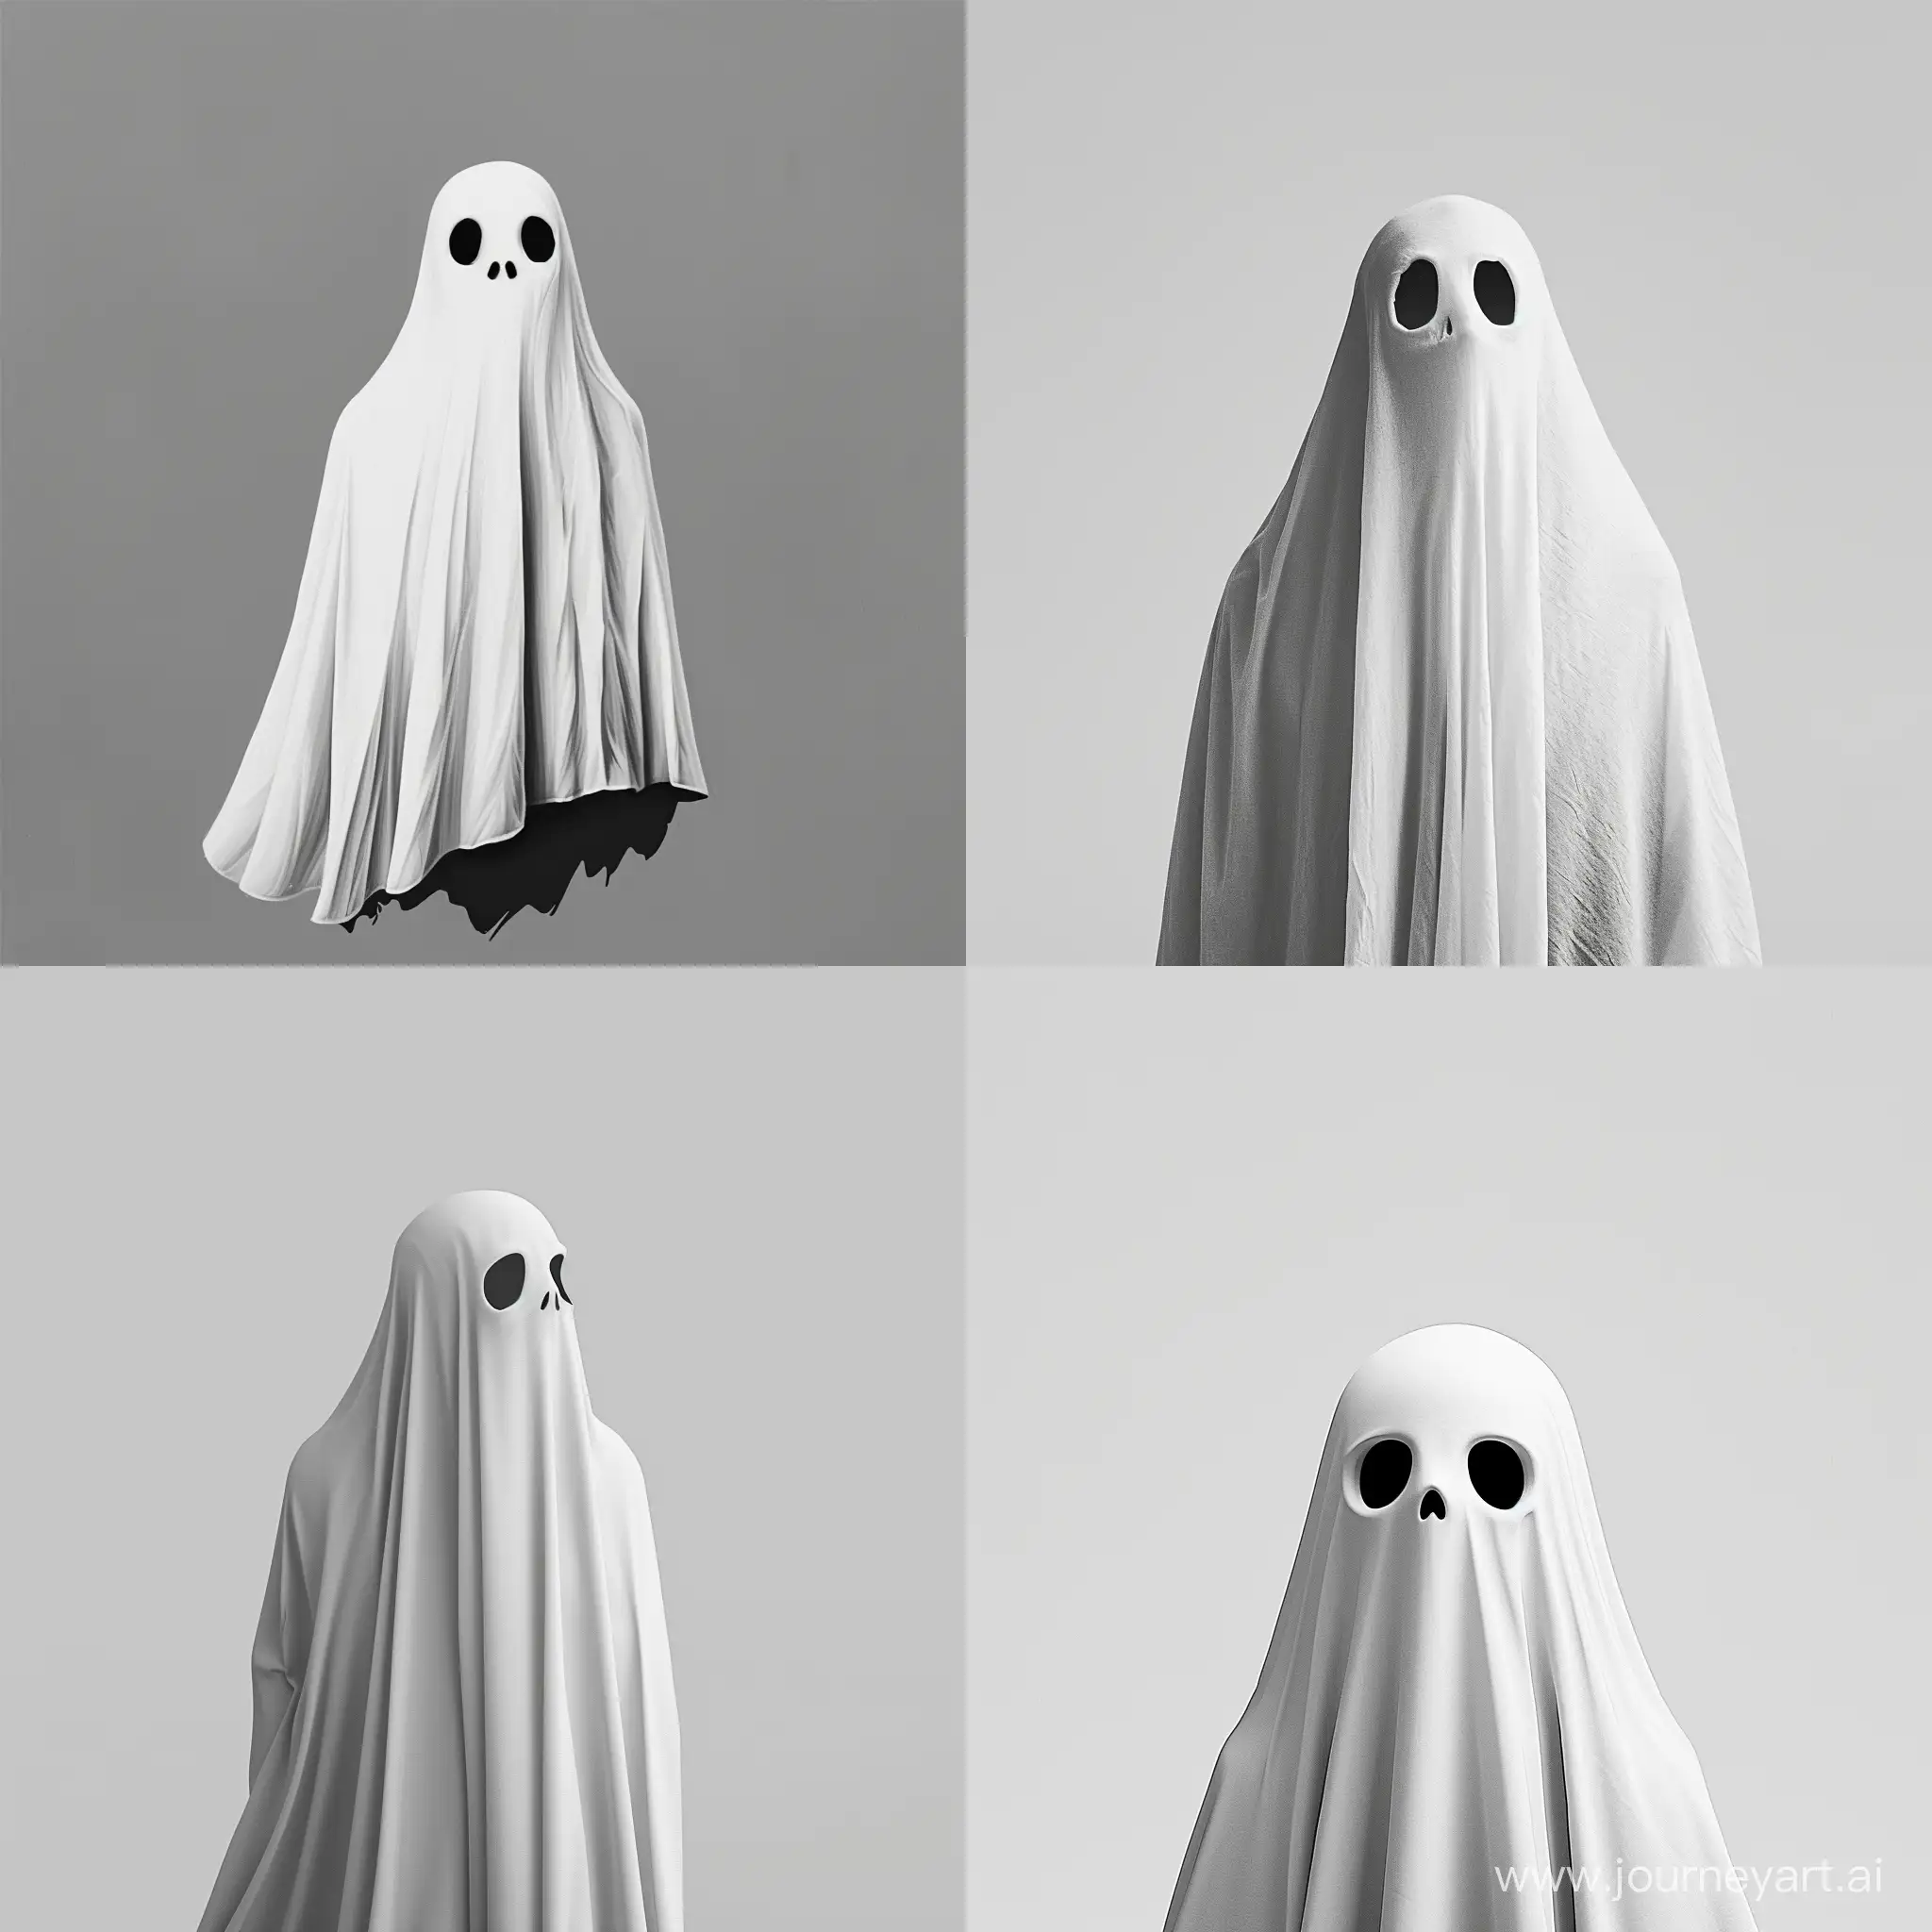 Friendly-Monochrome-Ghost-on-Solid-Light-Grey-Background